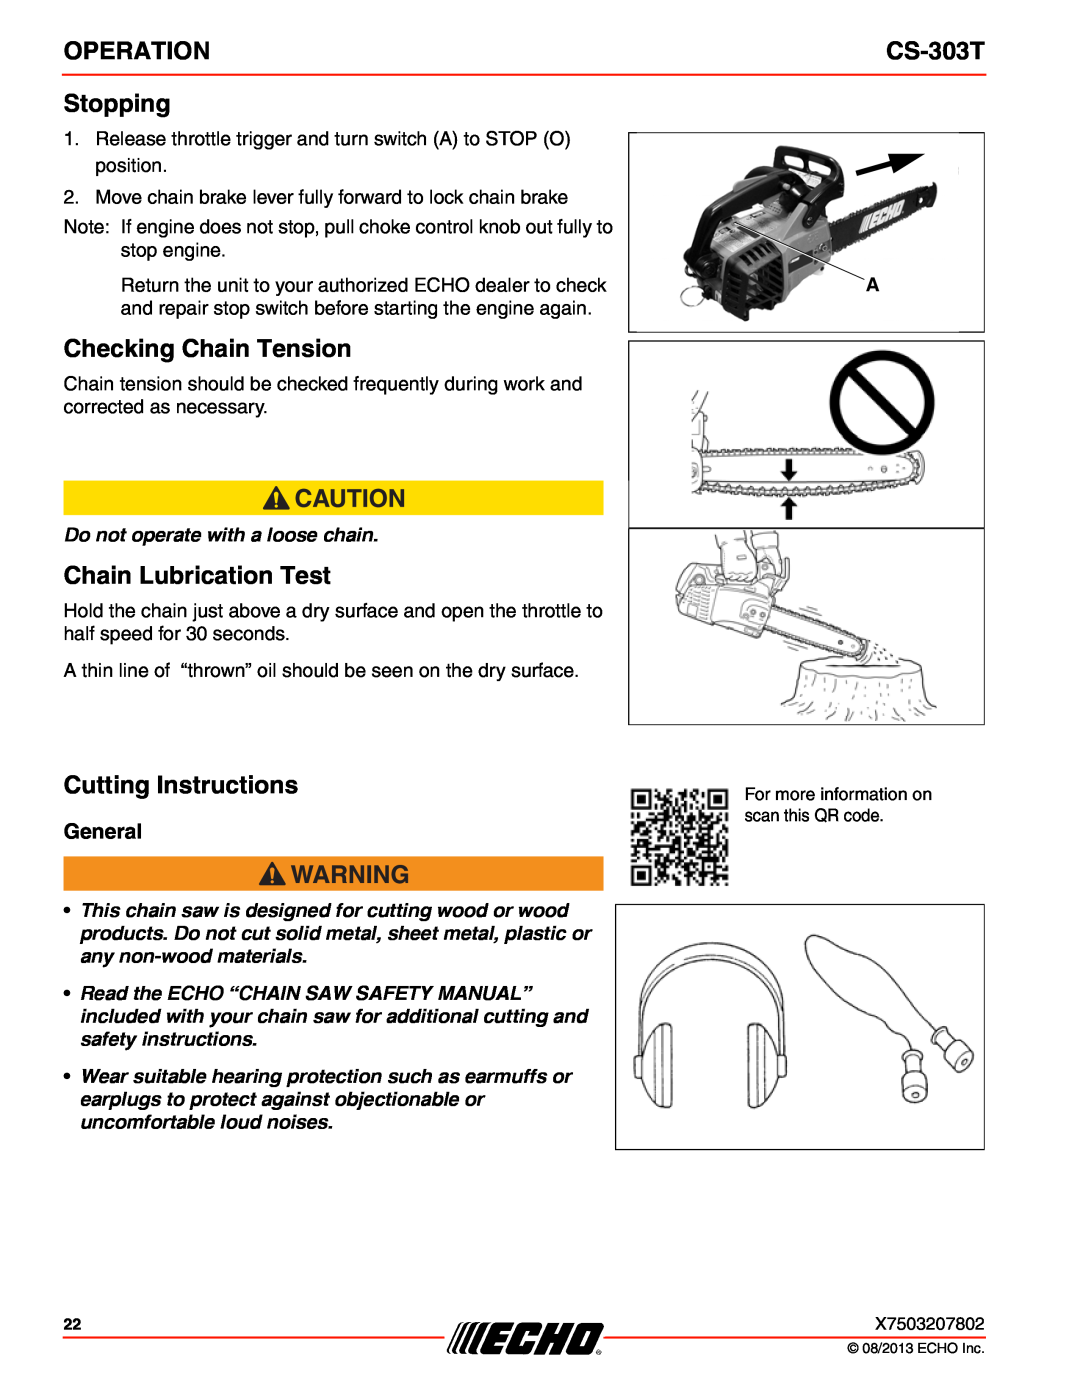 Echo CS-303T Stopping, Checking Chain Tension, Chain Lubrication Test, Cutting Instructions, General, Operation 